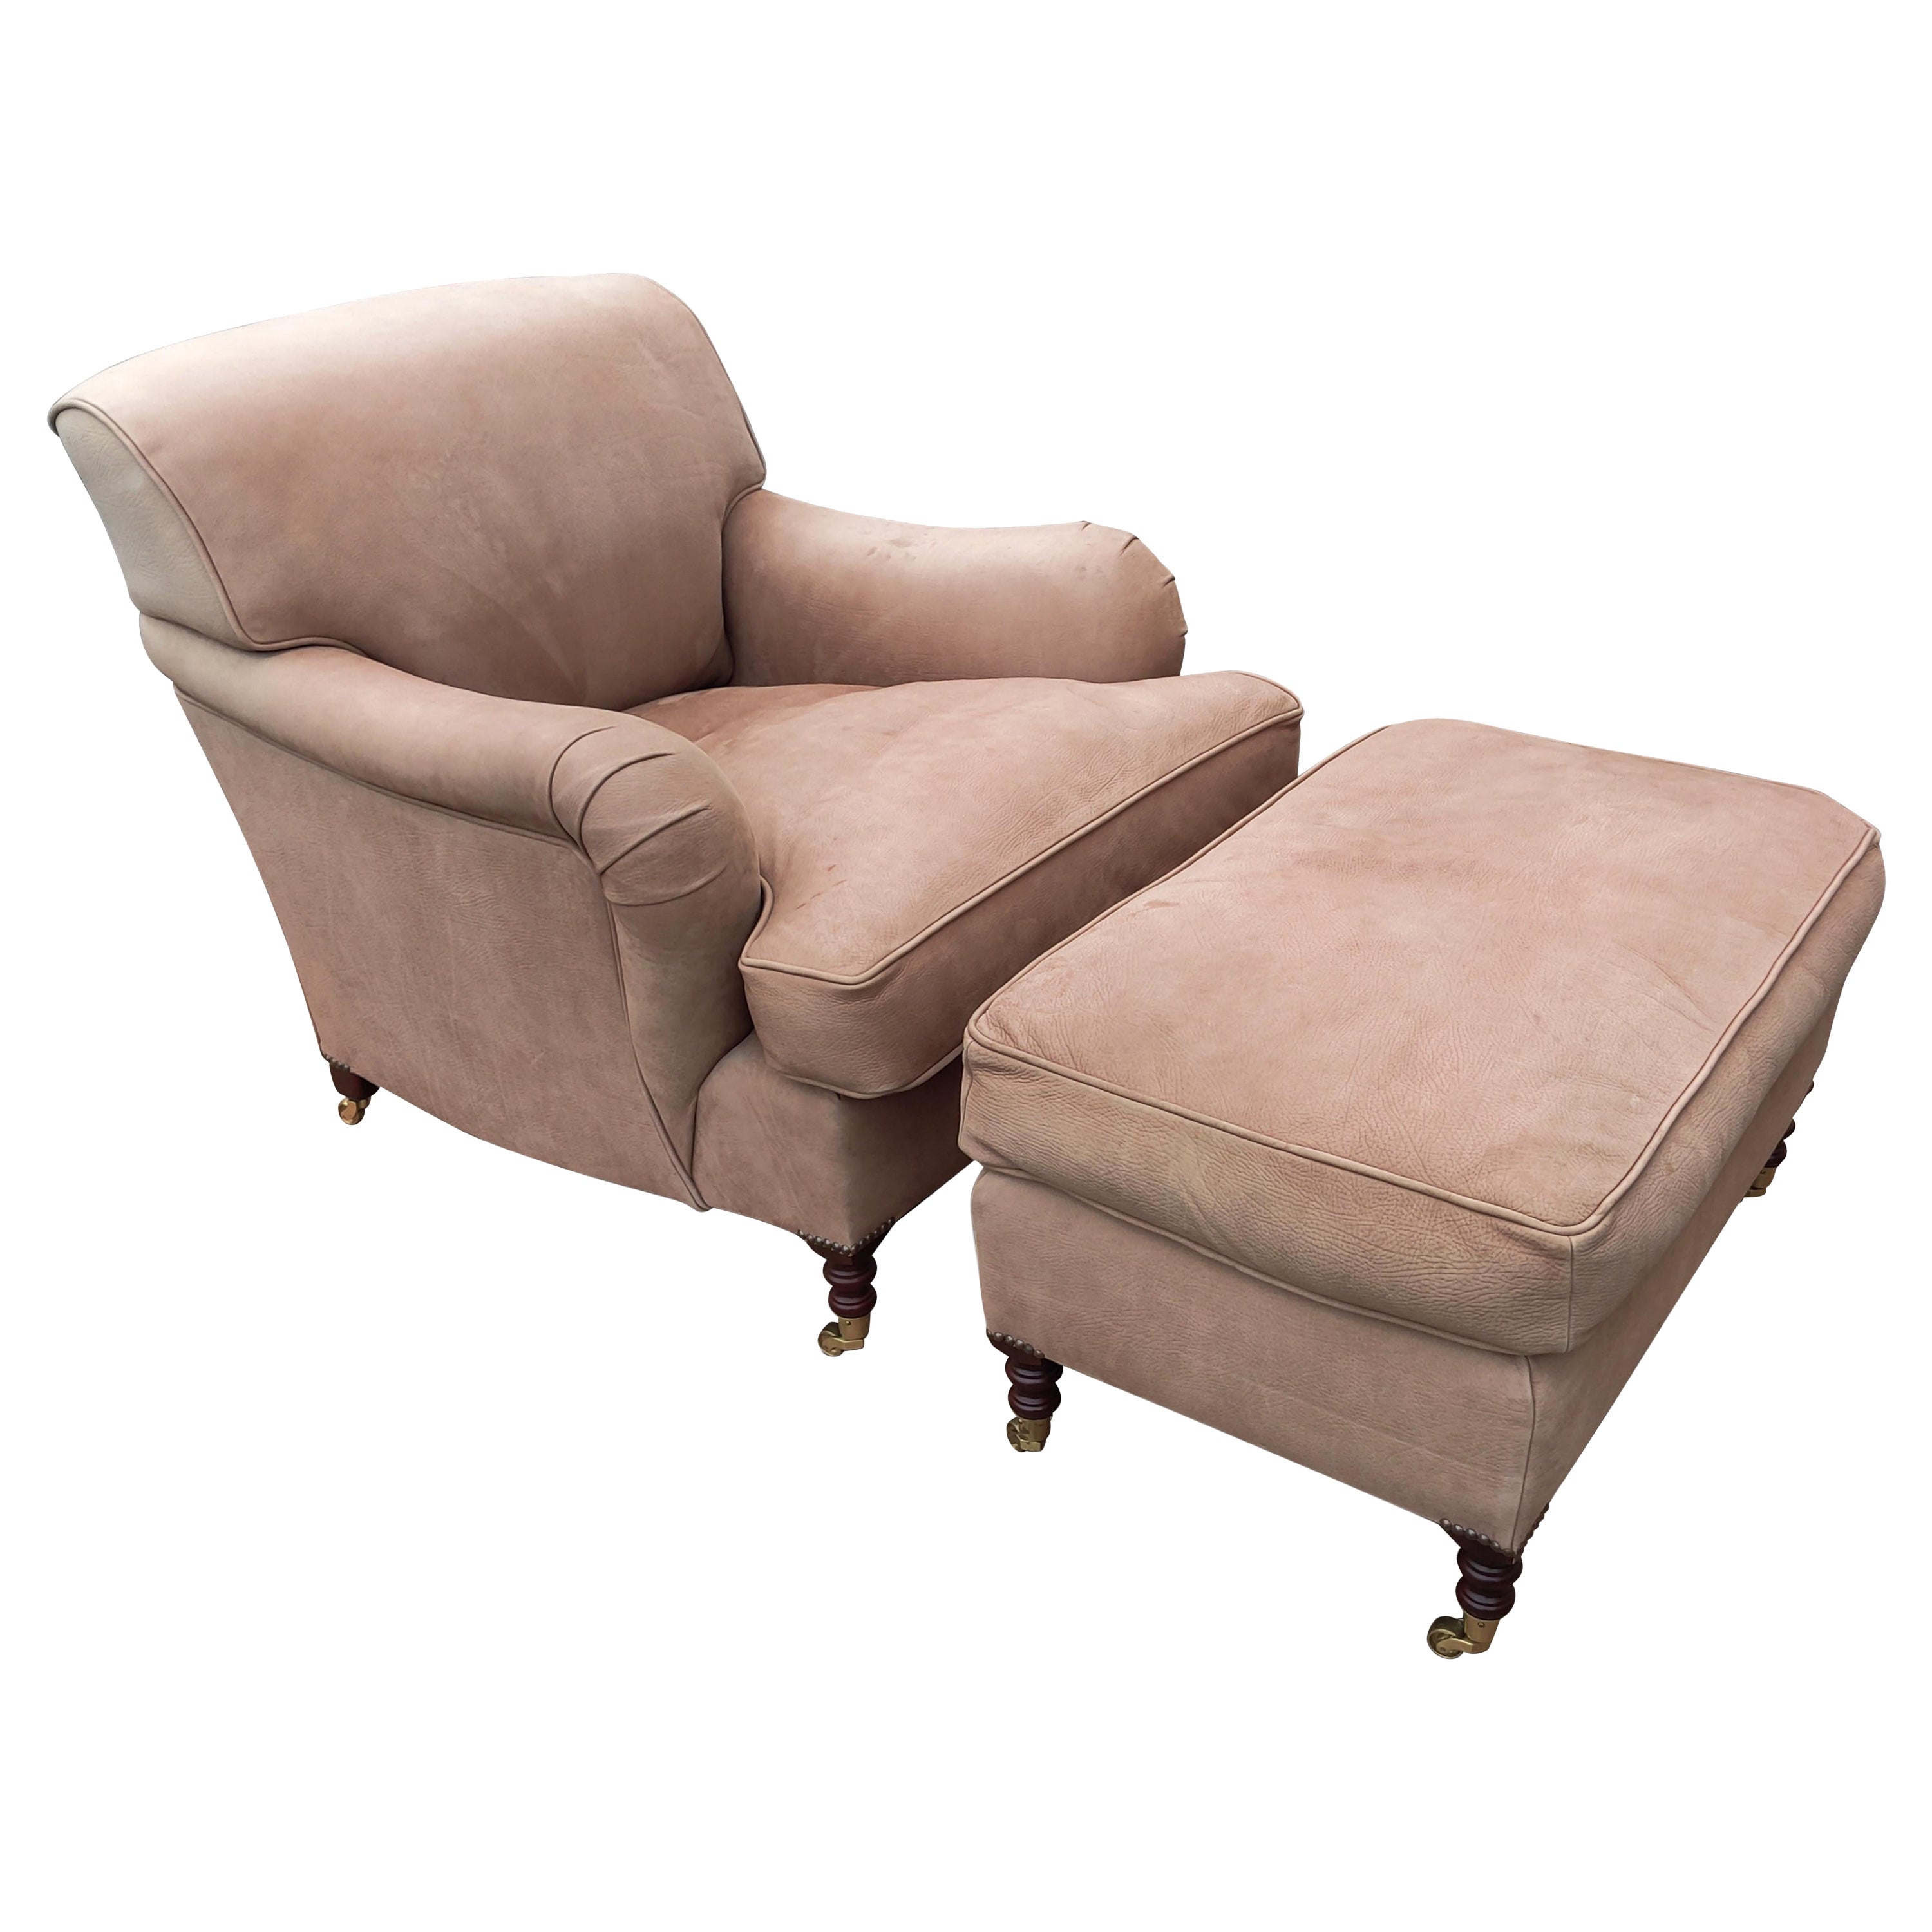 George Smith Distressed Light Beige Leather Armchair Club Chair with Ottoman